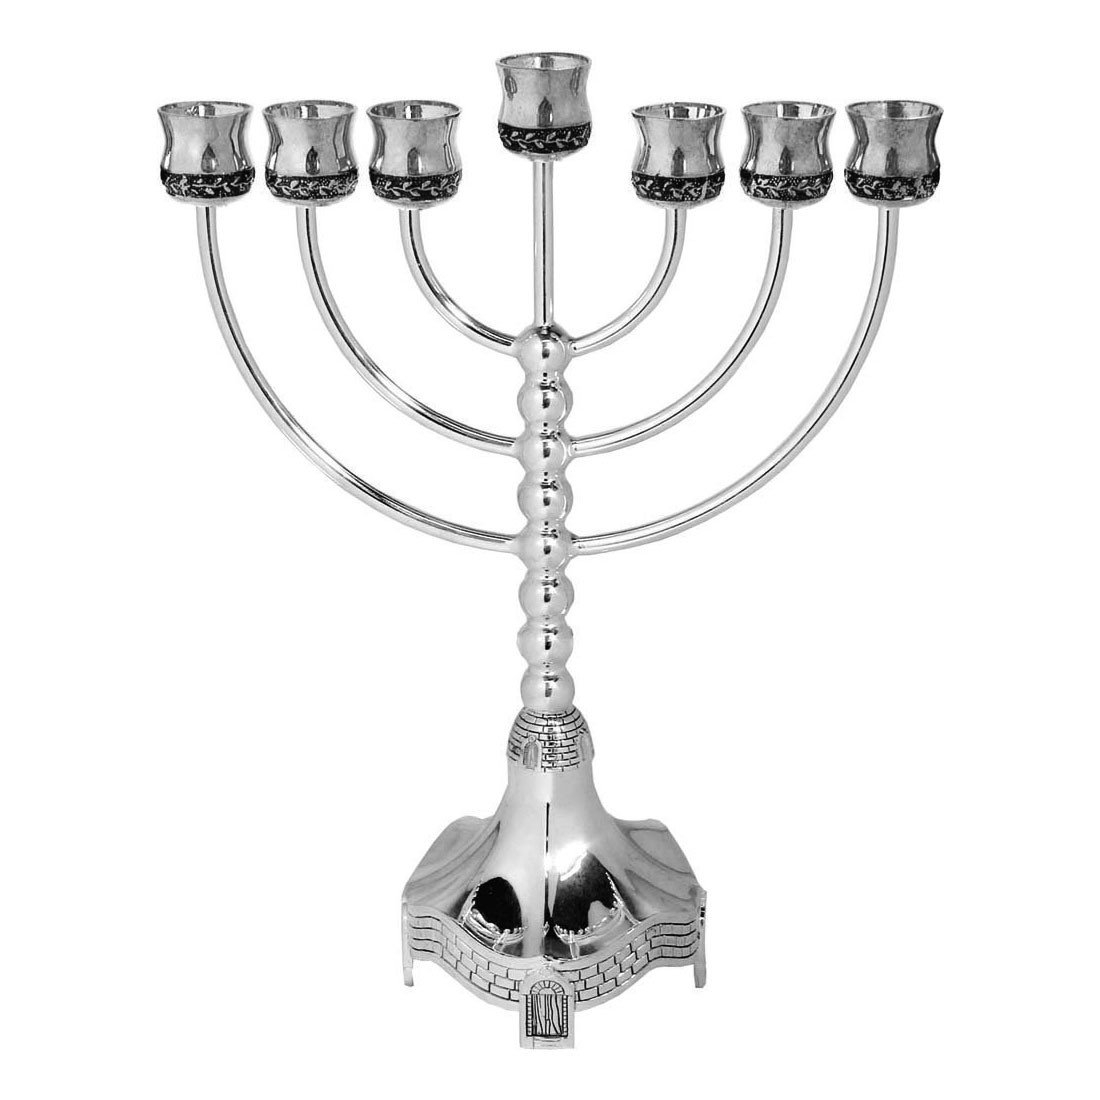 Silver Plated Bubble Stem Traditional 7-Branched Menorah with Vines and Jerusalem Motif - 1